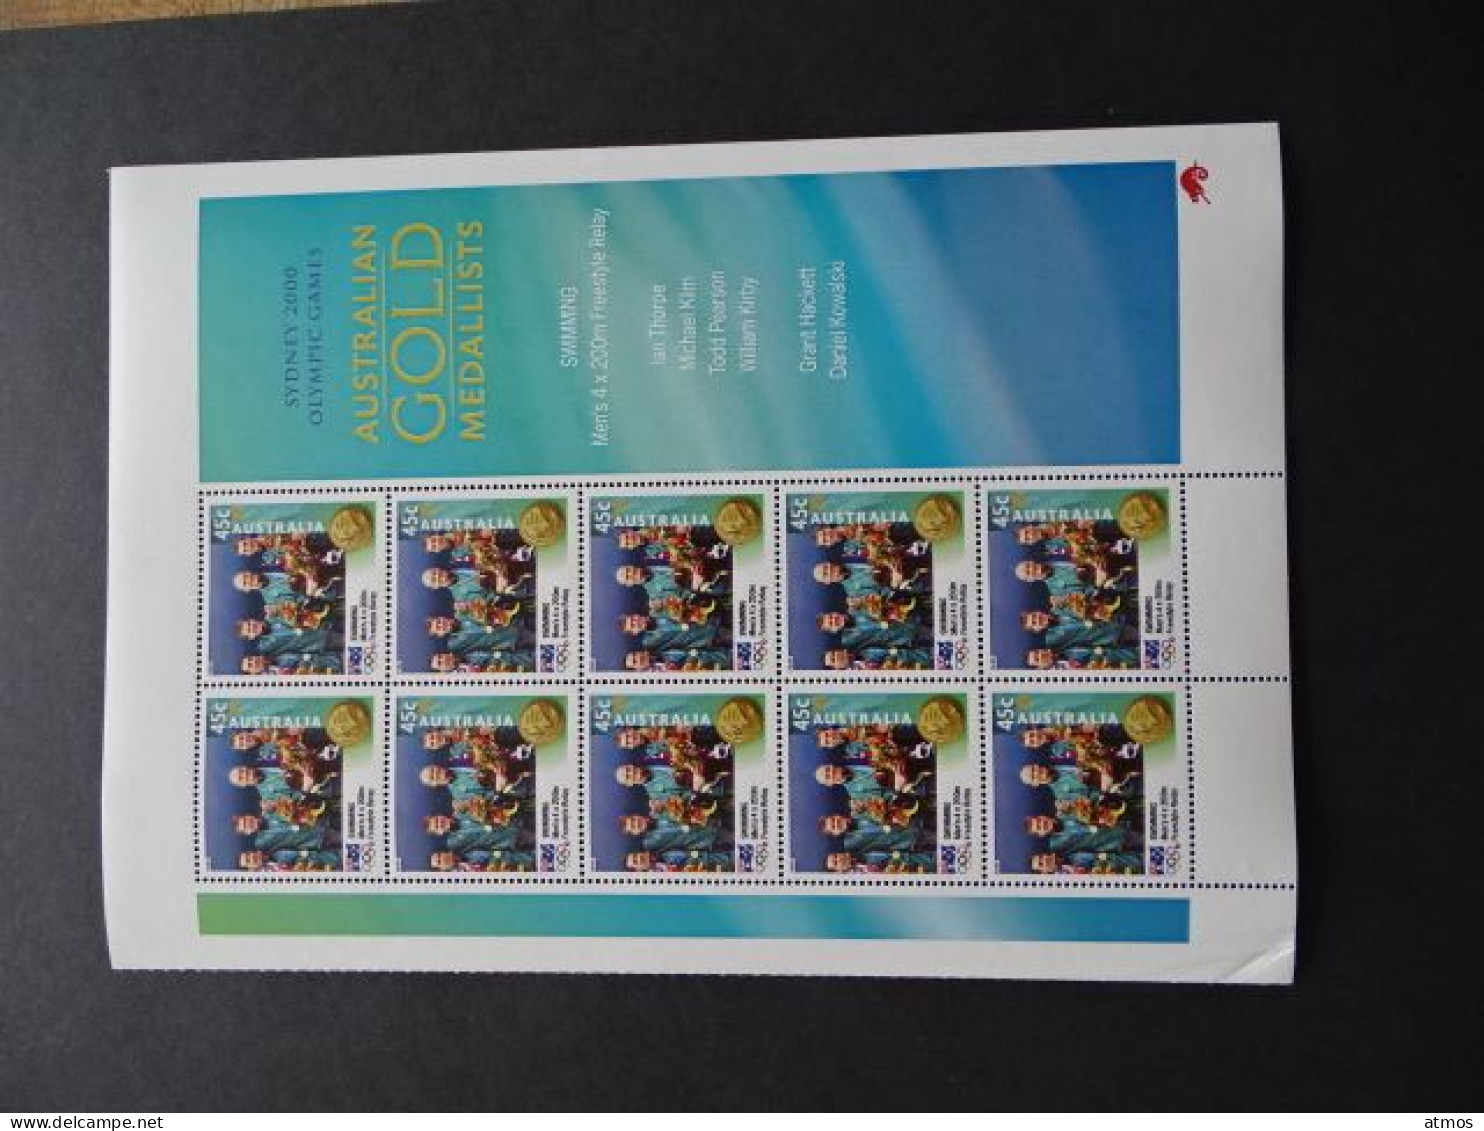 Australia MNH Michel Nr 1978 Sheet Of 10 From 2000 VIC - Mint Stamps